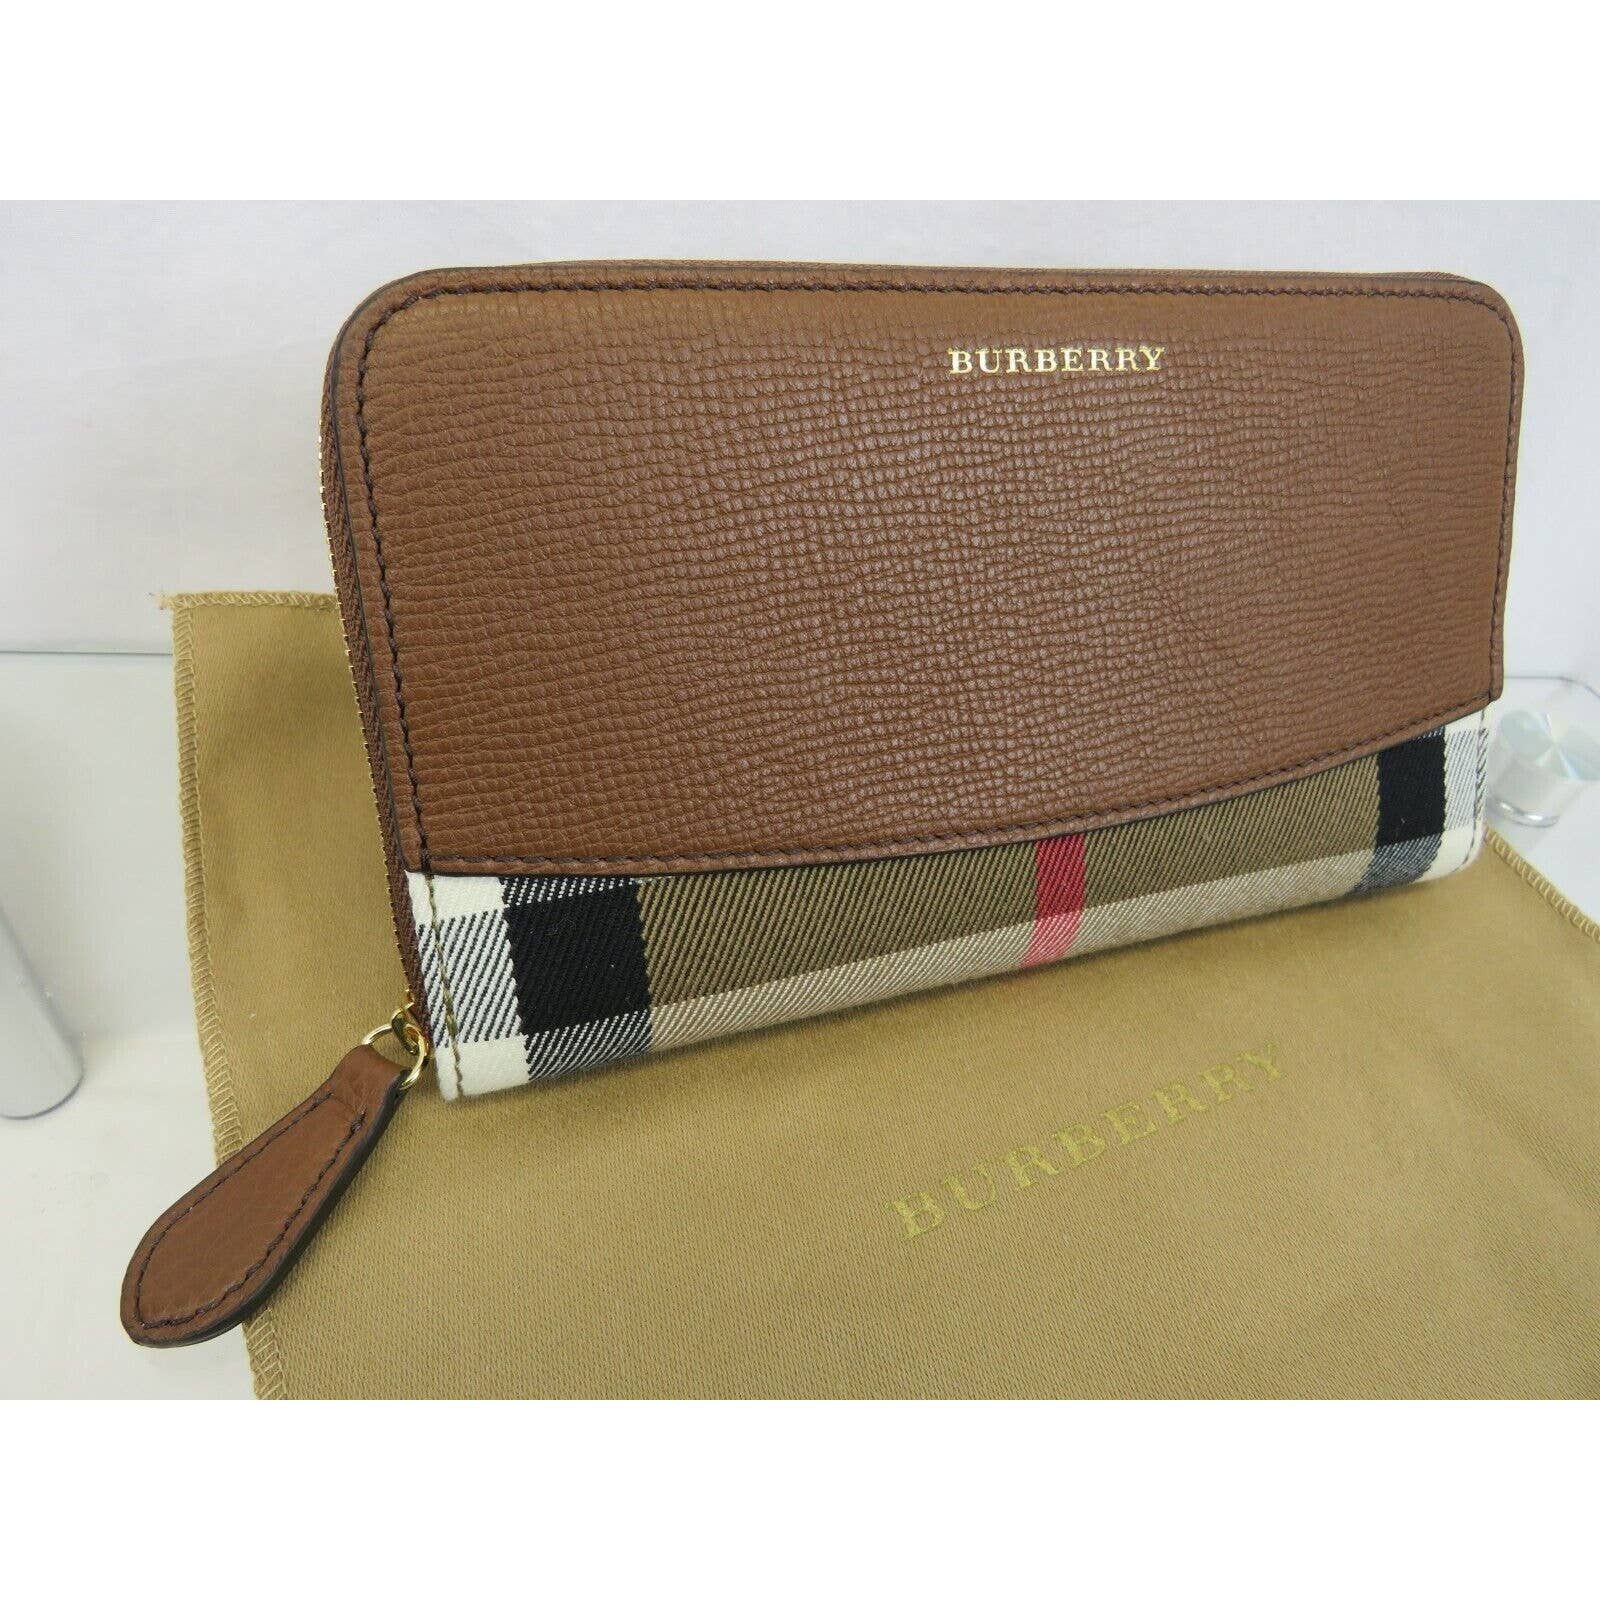 Burberry ELMORE BROWN HOUSE CHECK LEATHER ZIP LOGO CLUTCH WALLET Size ONE SIZE - 2 Preview